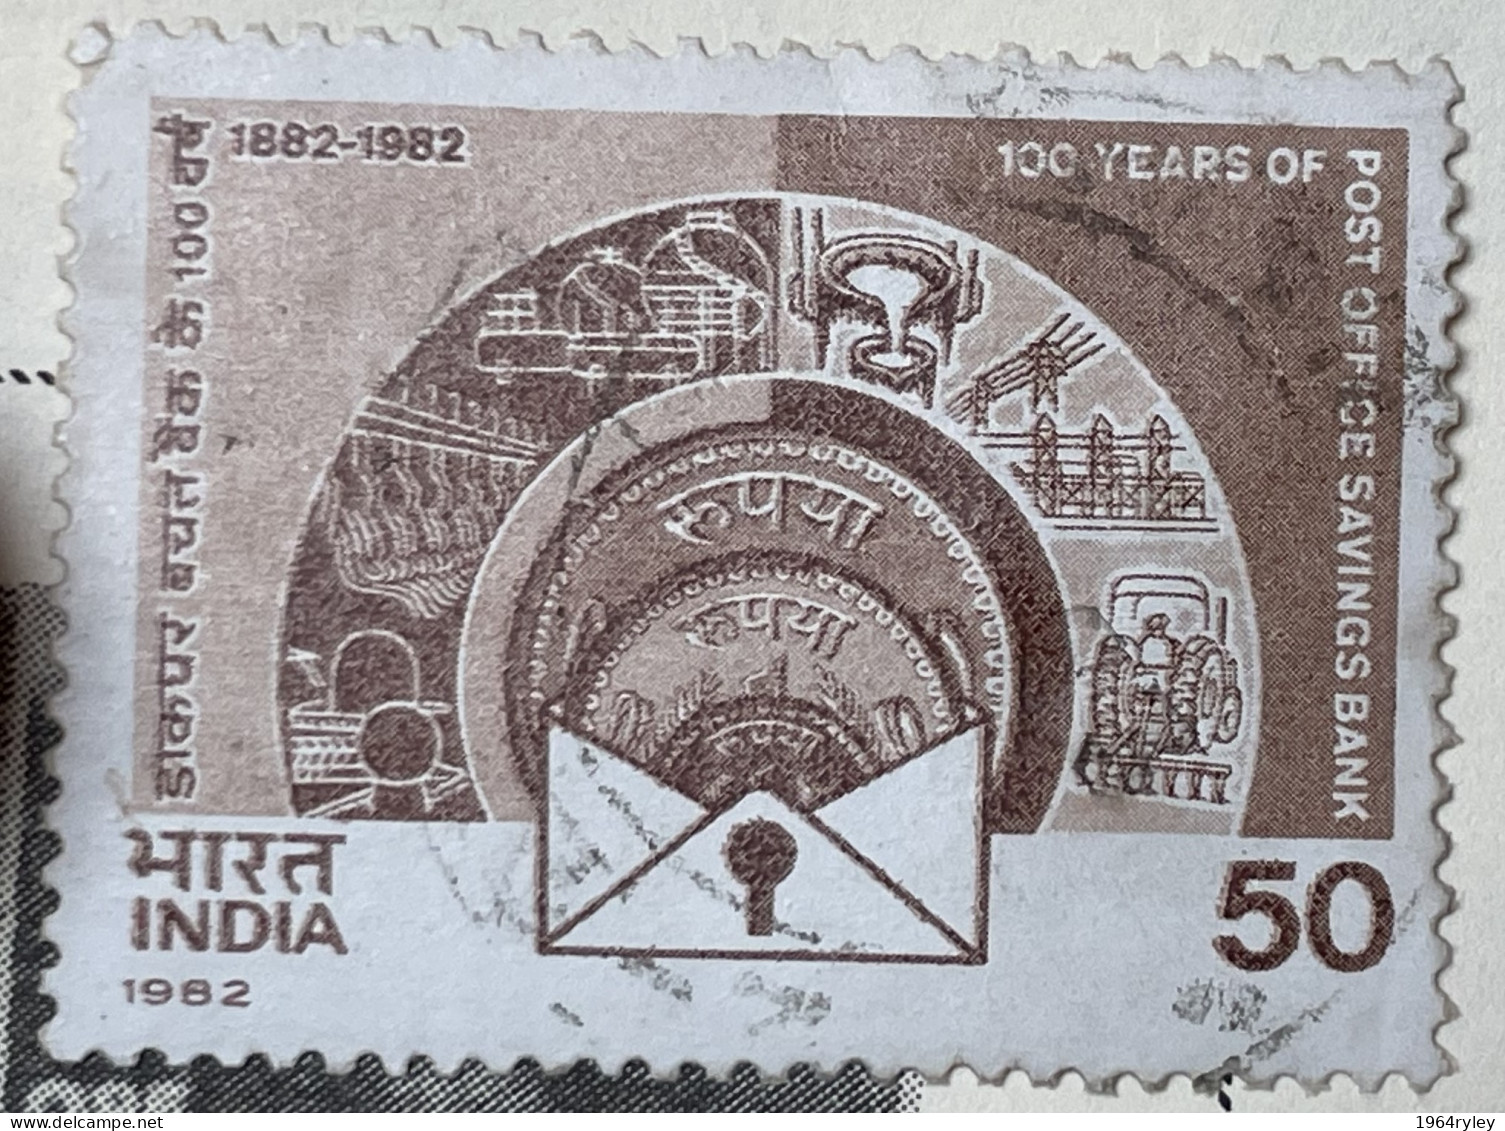 INDIA - (0) - 1982  #  992    SEE PHOTO FOR CONDITION OF STAMP(S) - Oblitérés